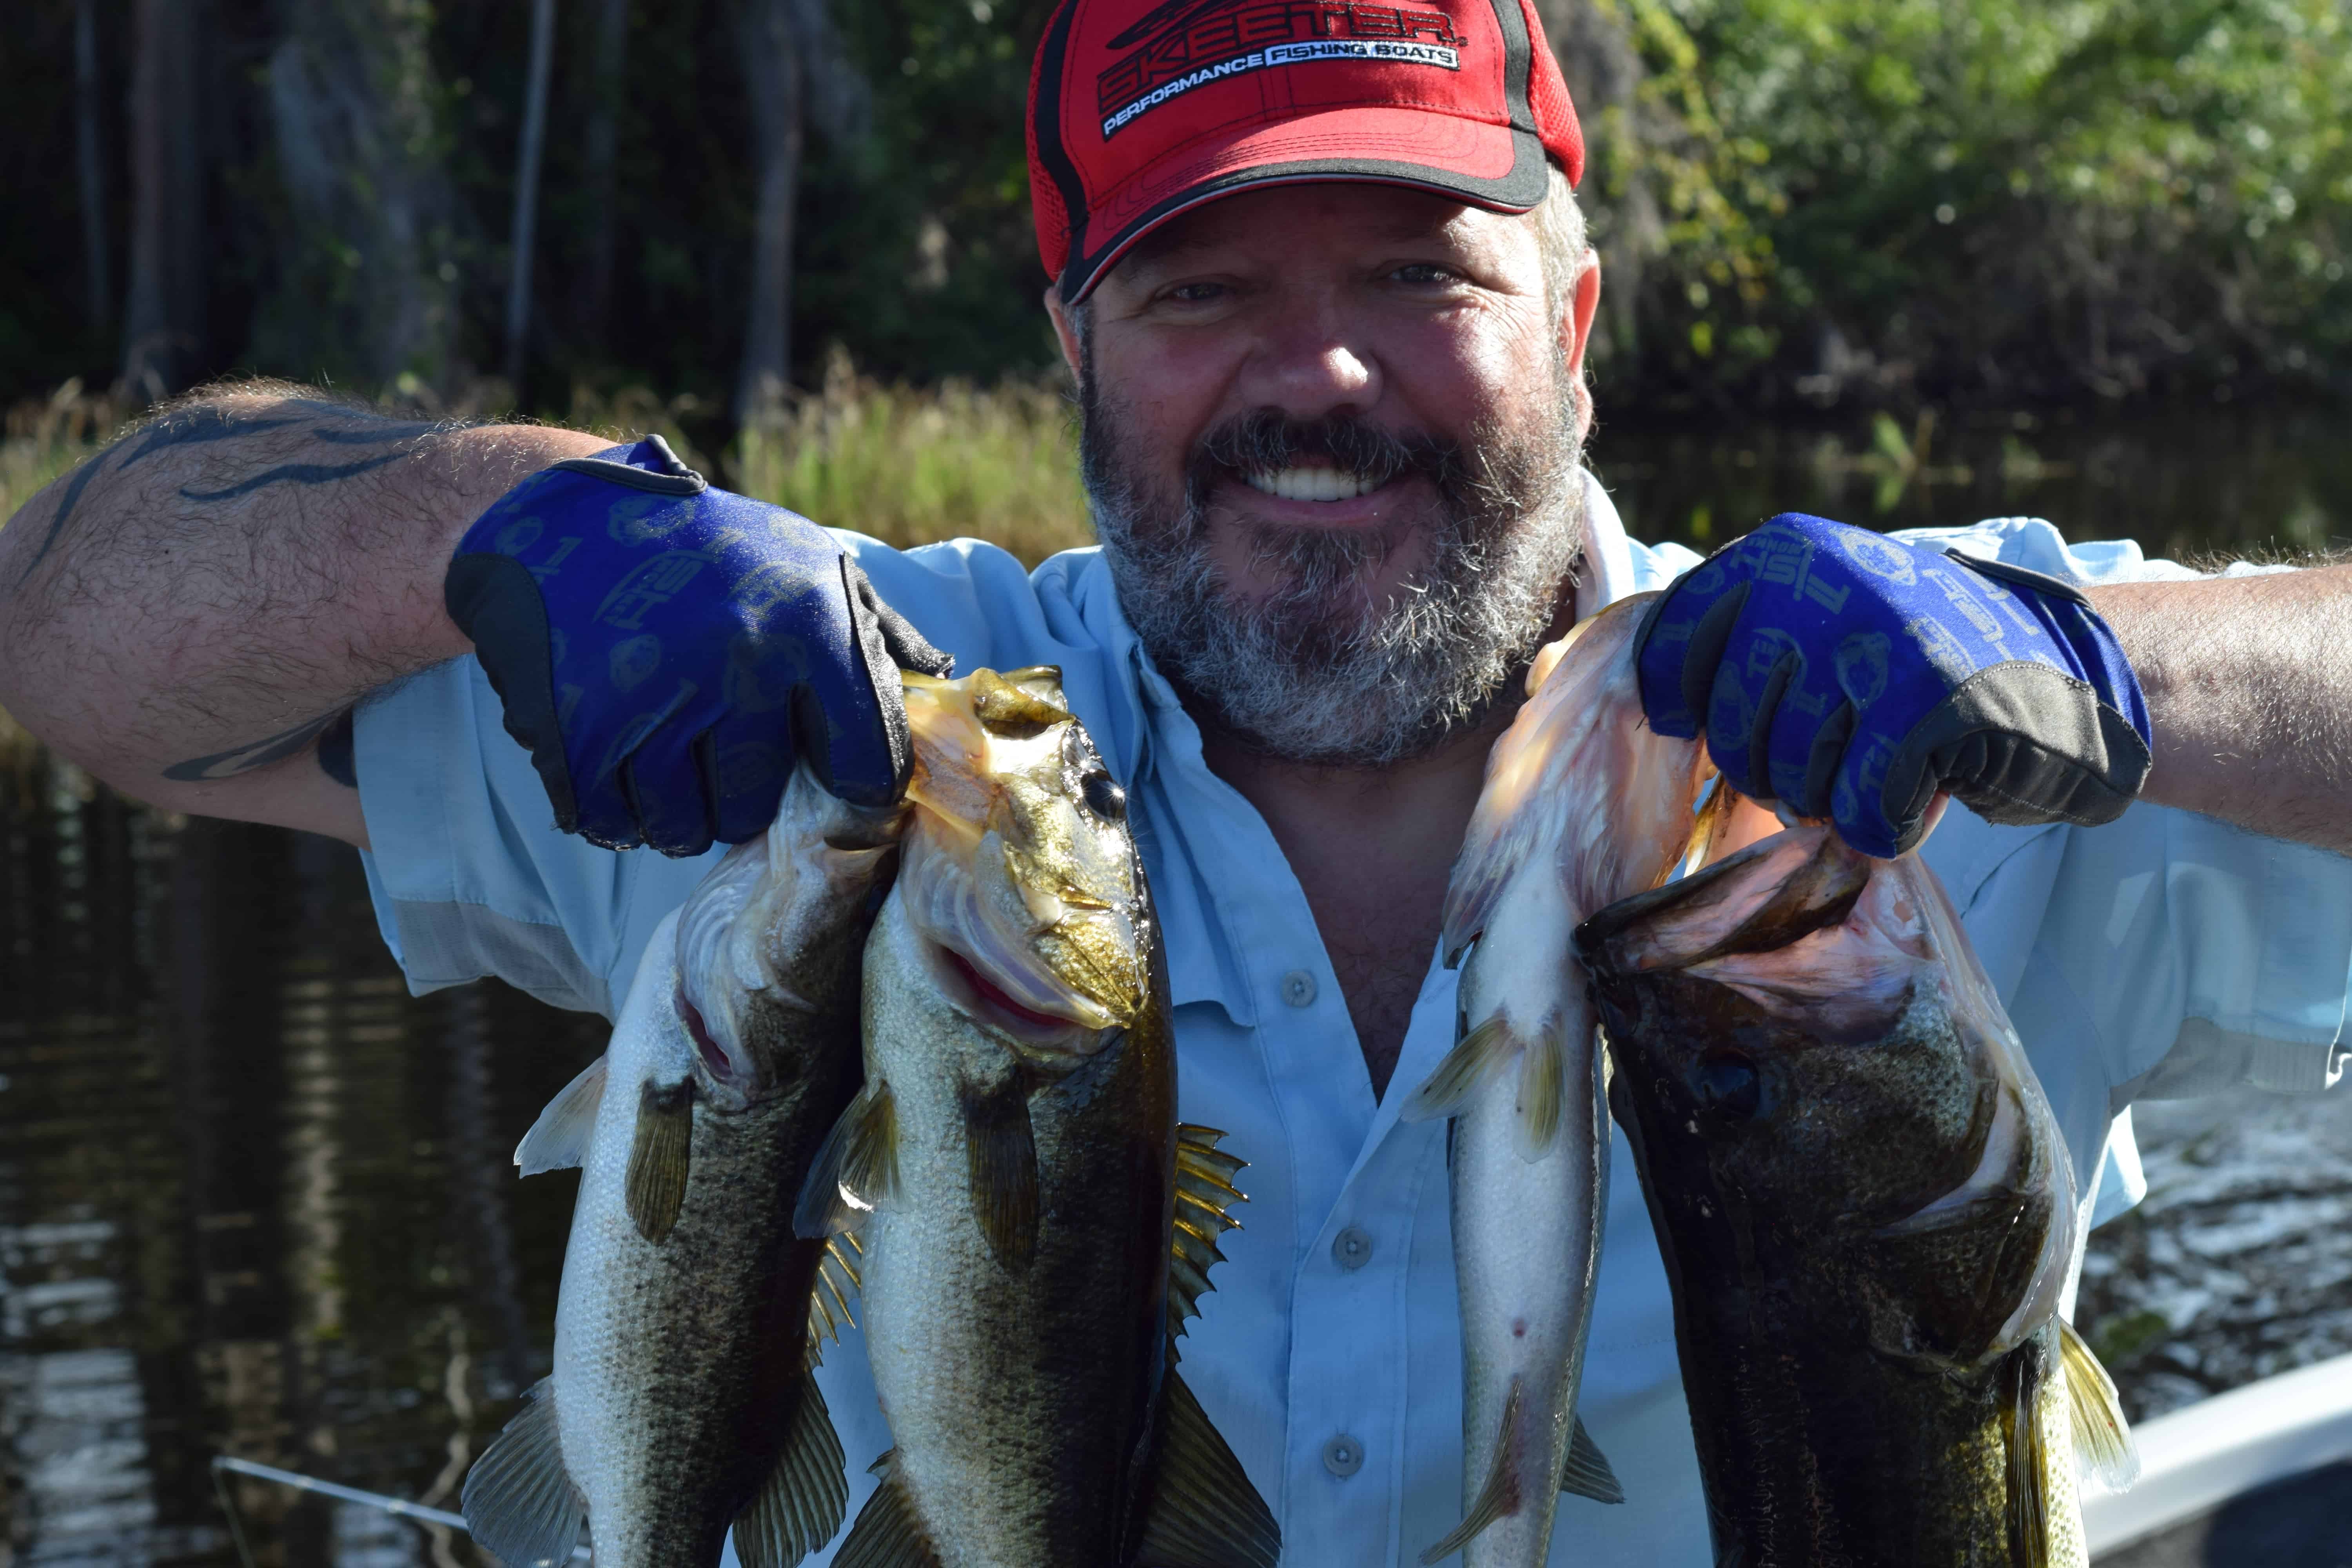 Get Hooked Bait And Tackle The Best Bass Guide Service in OrLANDO florida